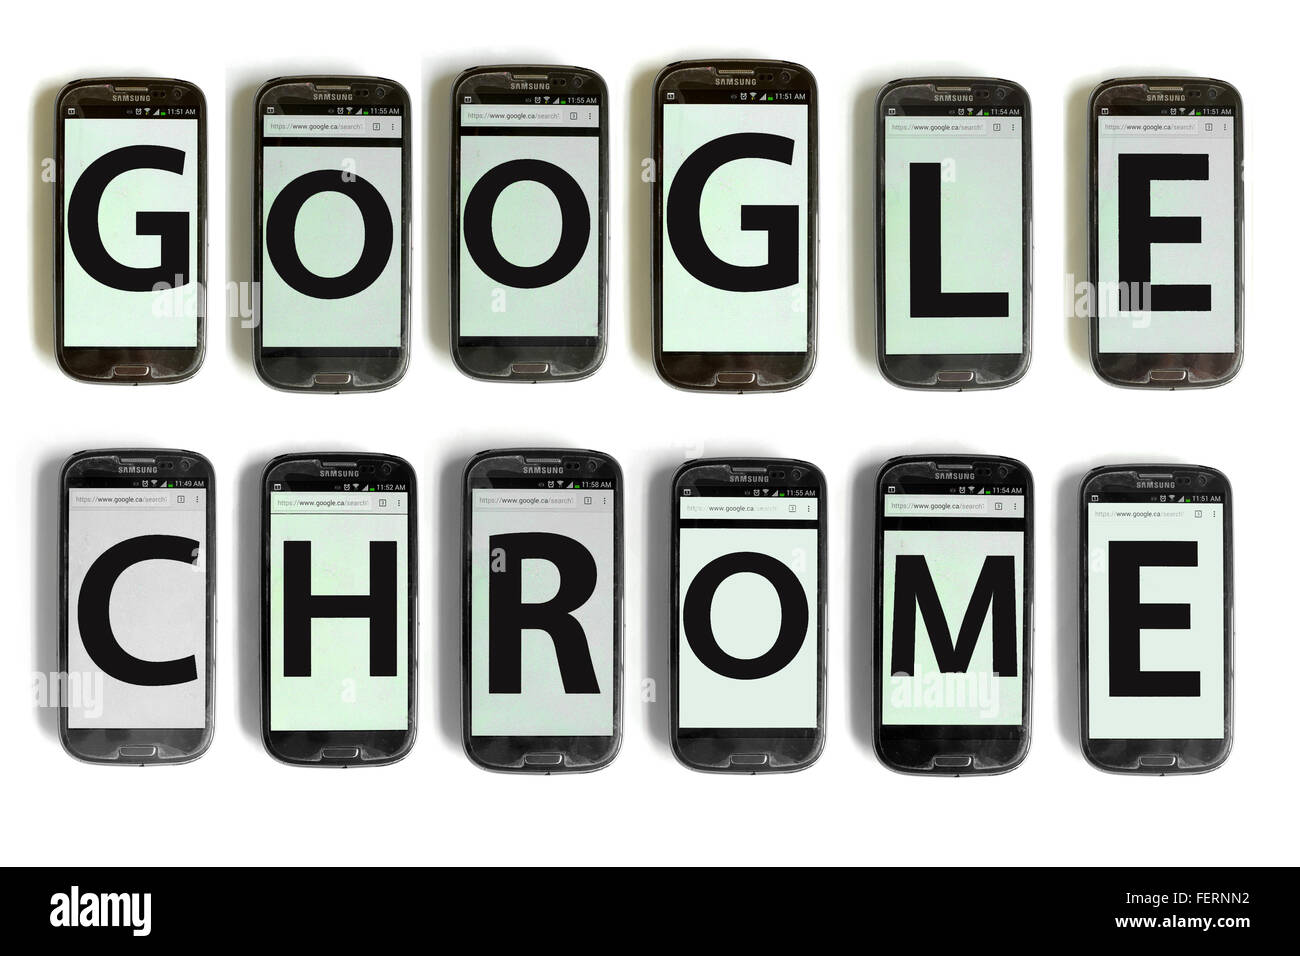 Google Chrome on the screens of smartphones photographed against a white background. Stock Photo